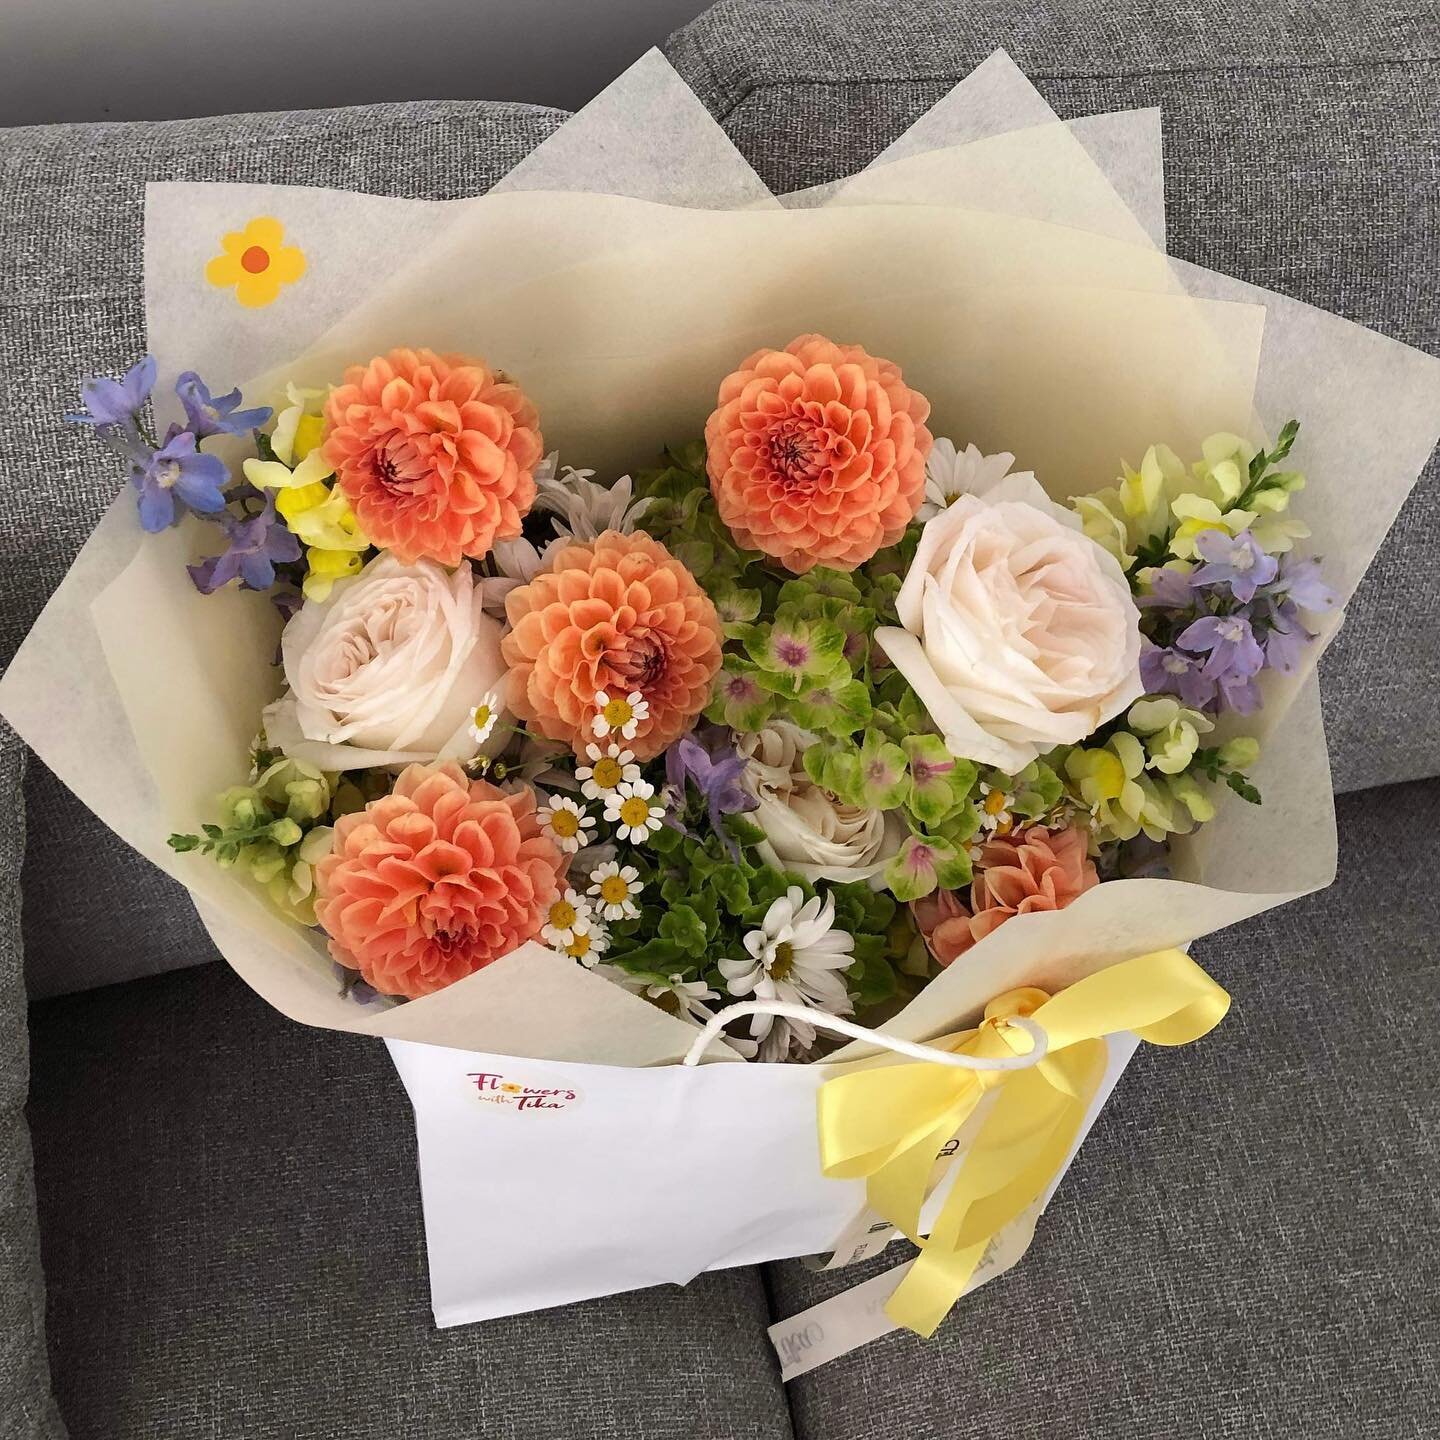 Gifting done right 💐🎁

These flowers were gifted by the team @huntervalleycatering to their amazing Boss Lady, Julie! 

The brief was floral magic with no pink flowers, and this was the result ✨

https://www.flowerswithtika.com.au